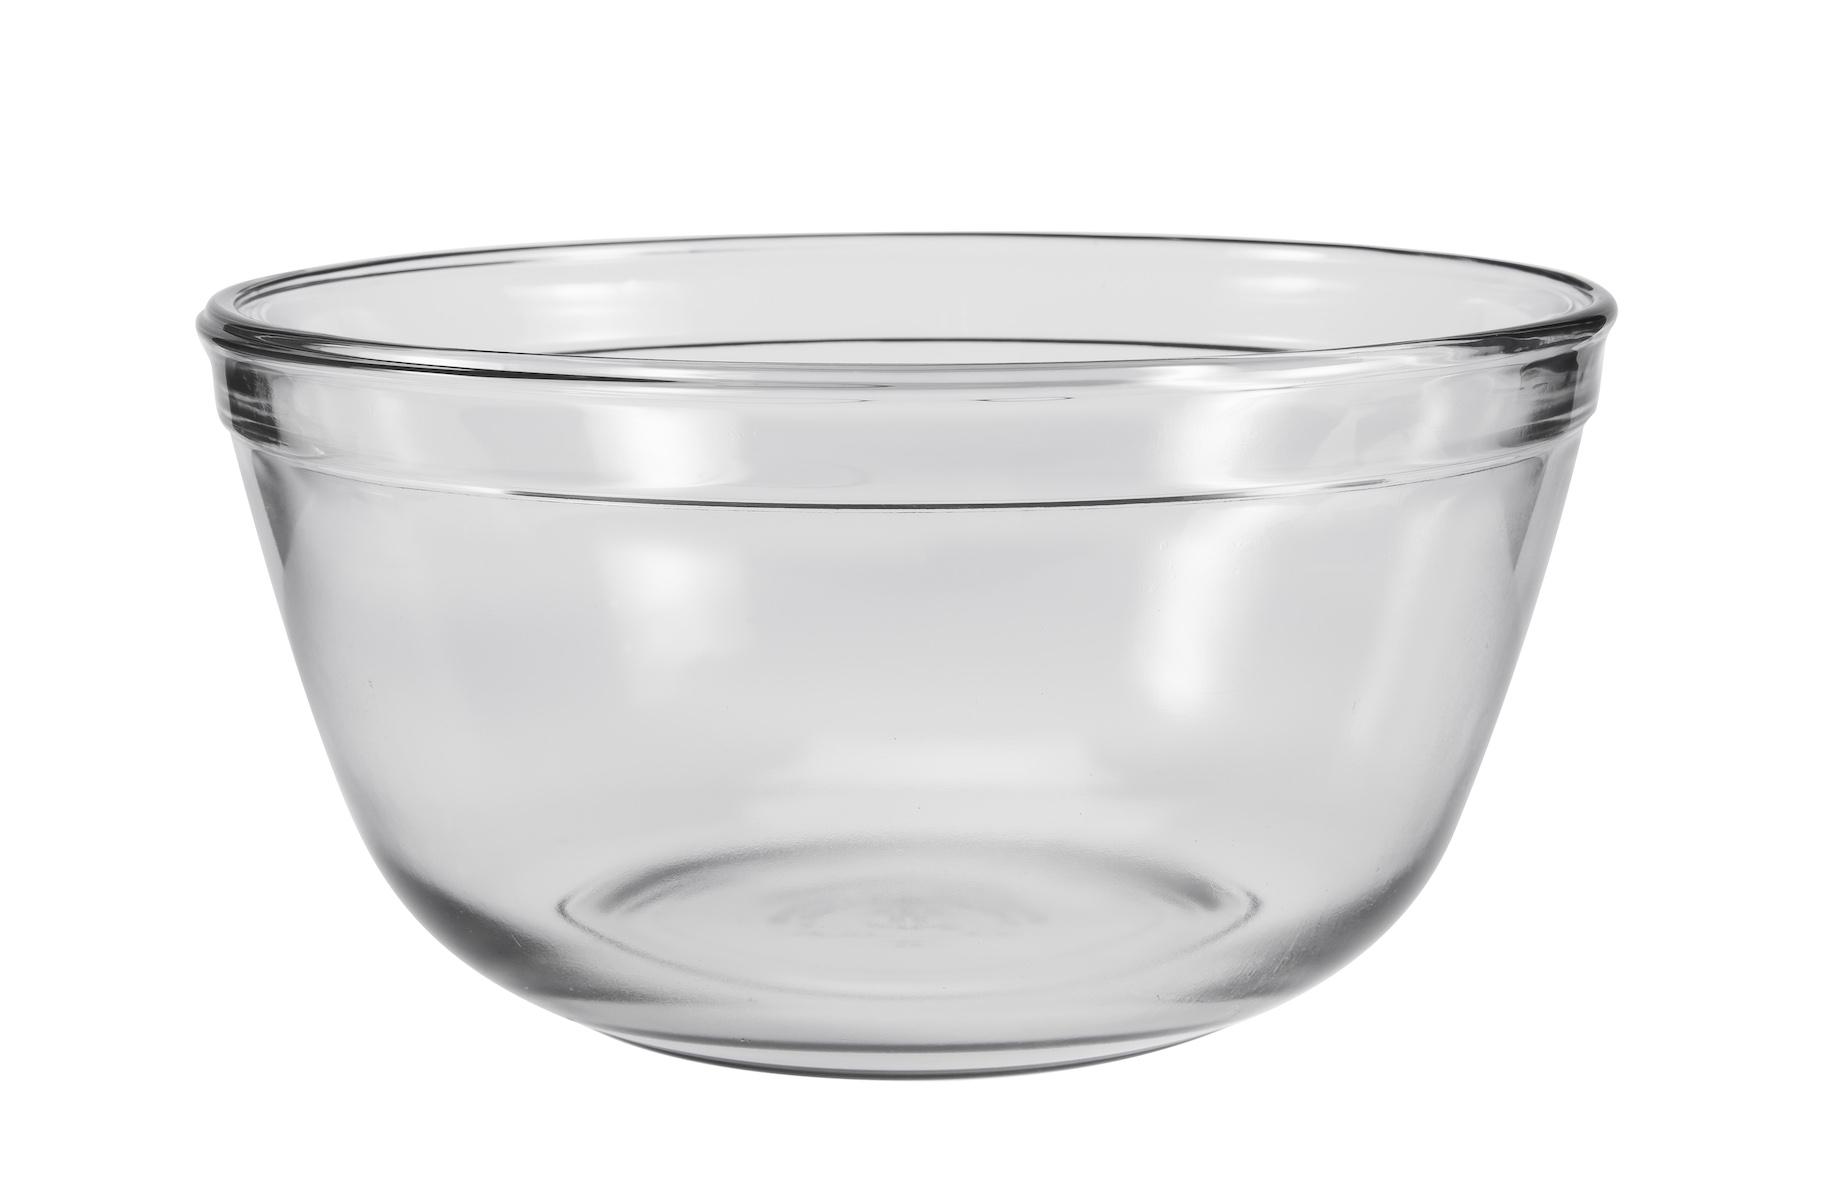 Anchor Hocking 2 Quart Glass Embossed Measurements Mixing Bowl For